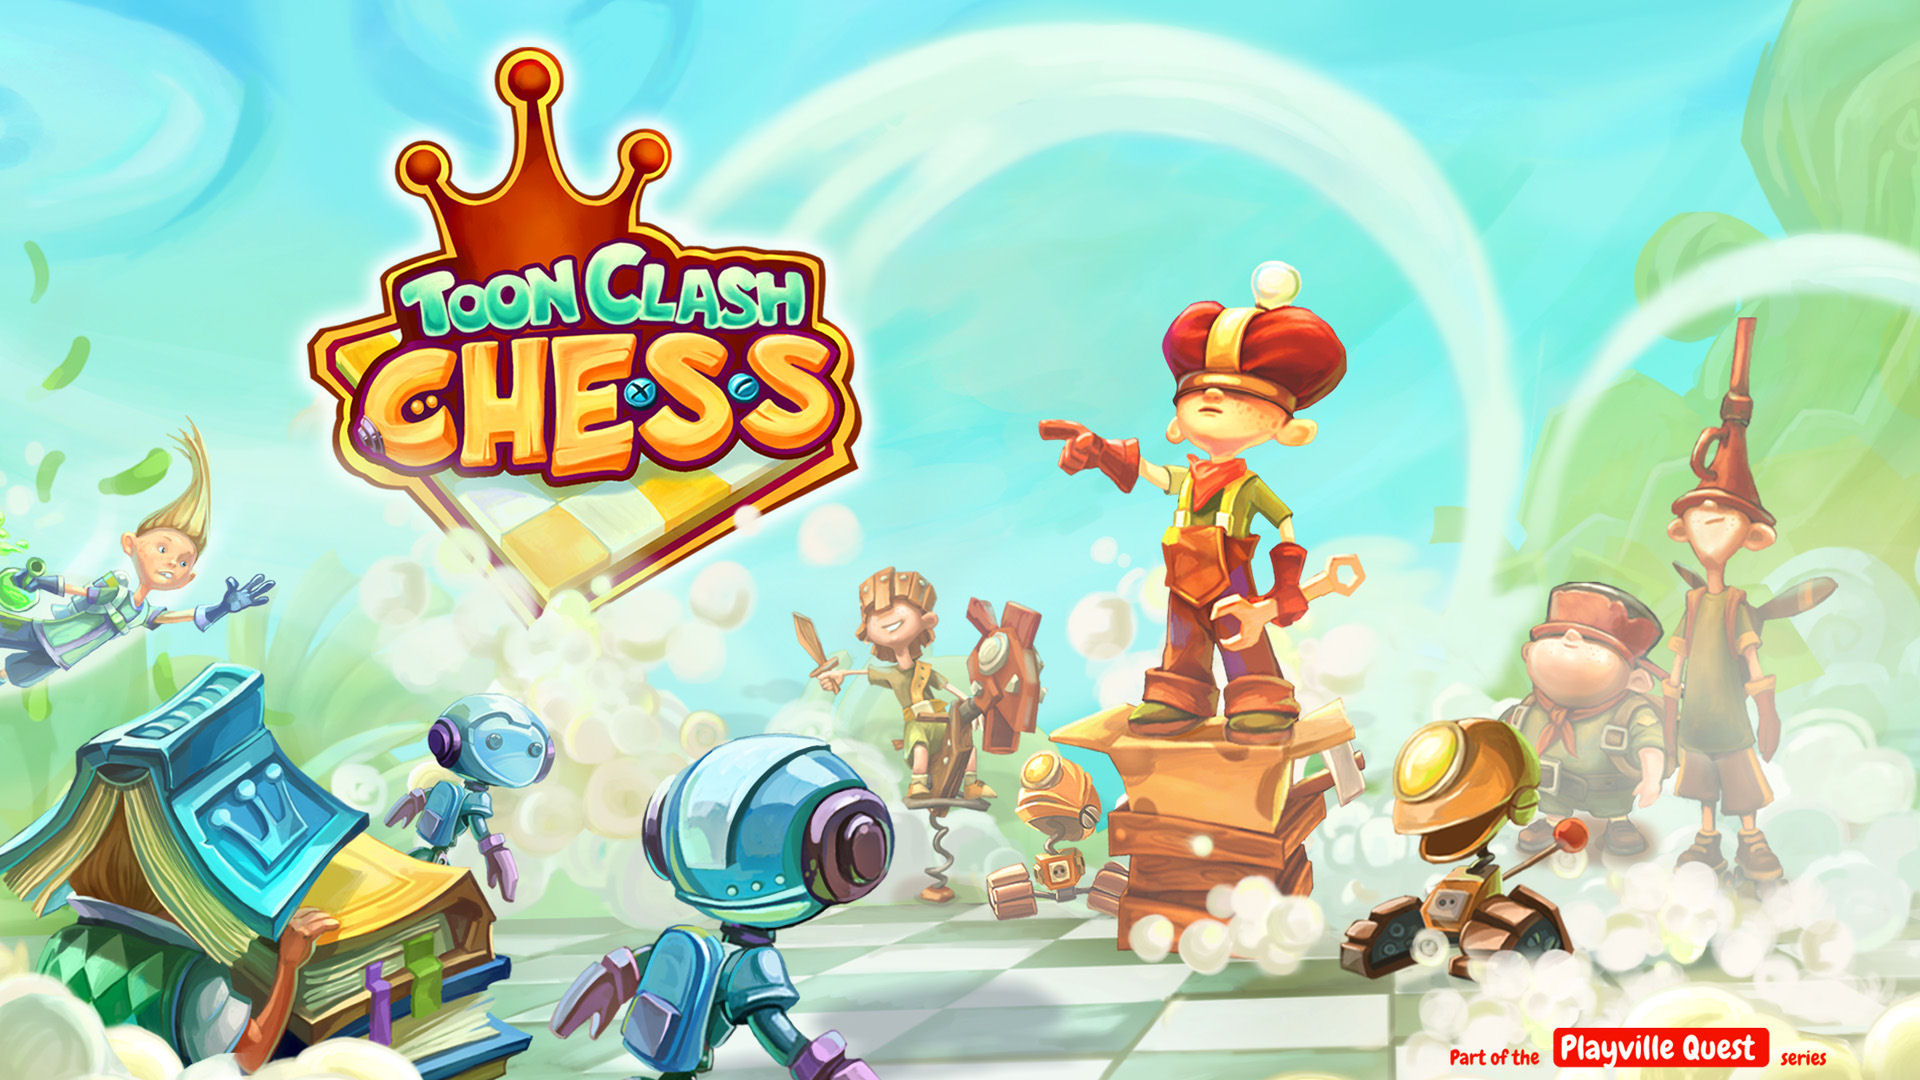 Toon Clash CHESS for ios instal free